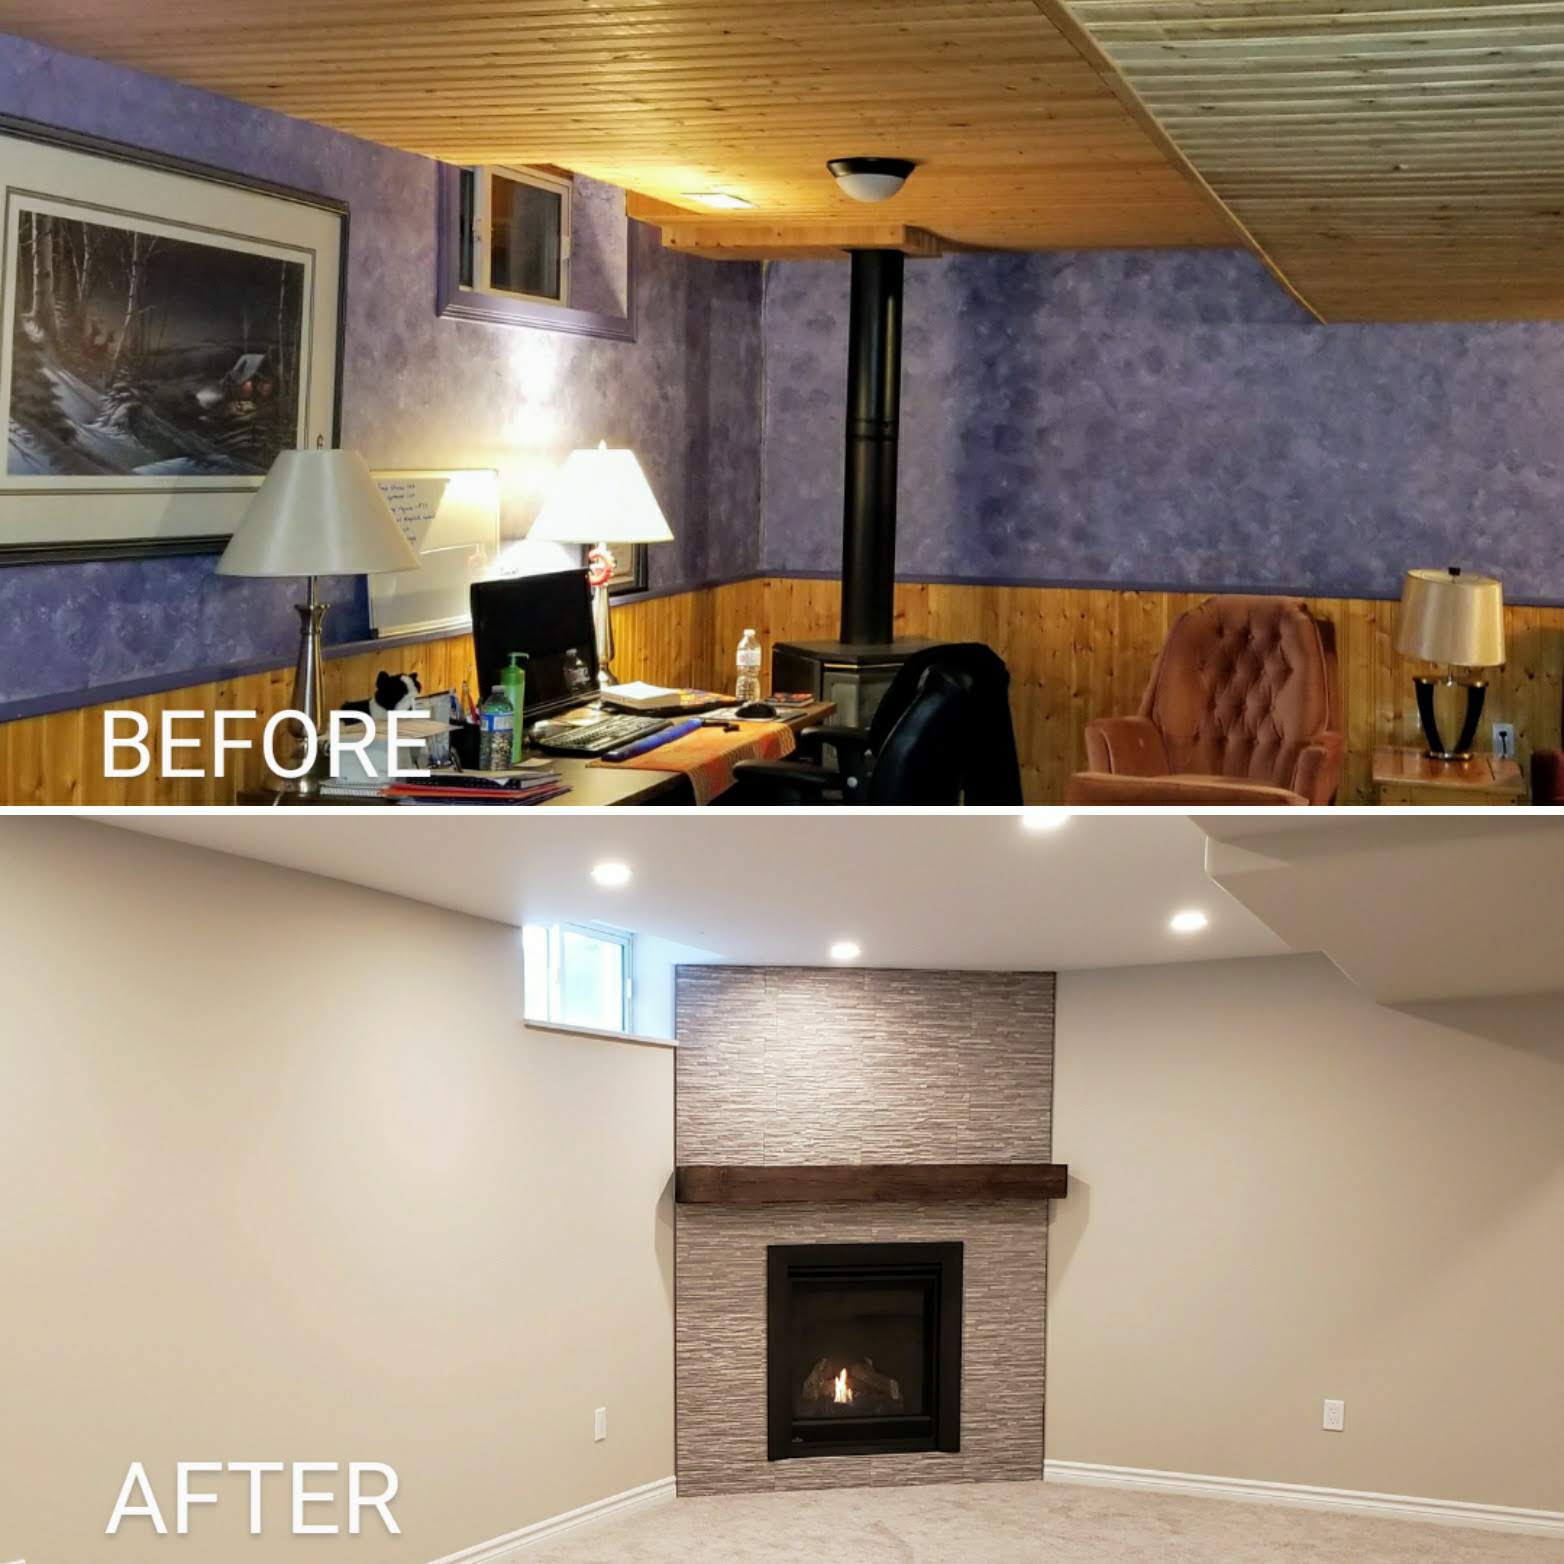 Before and after basement renovation by Germano Creative Interior Contracting Ltd.